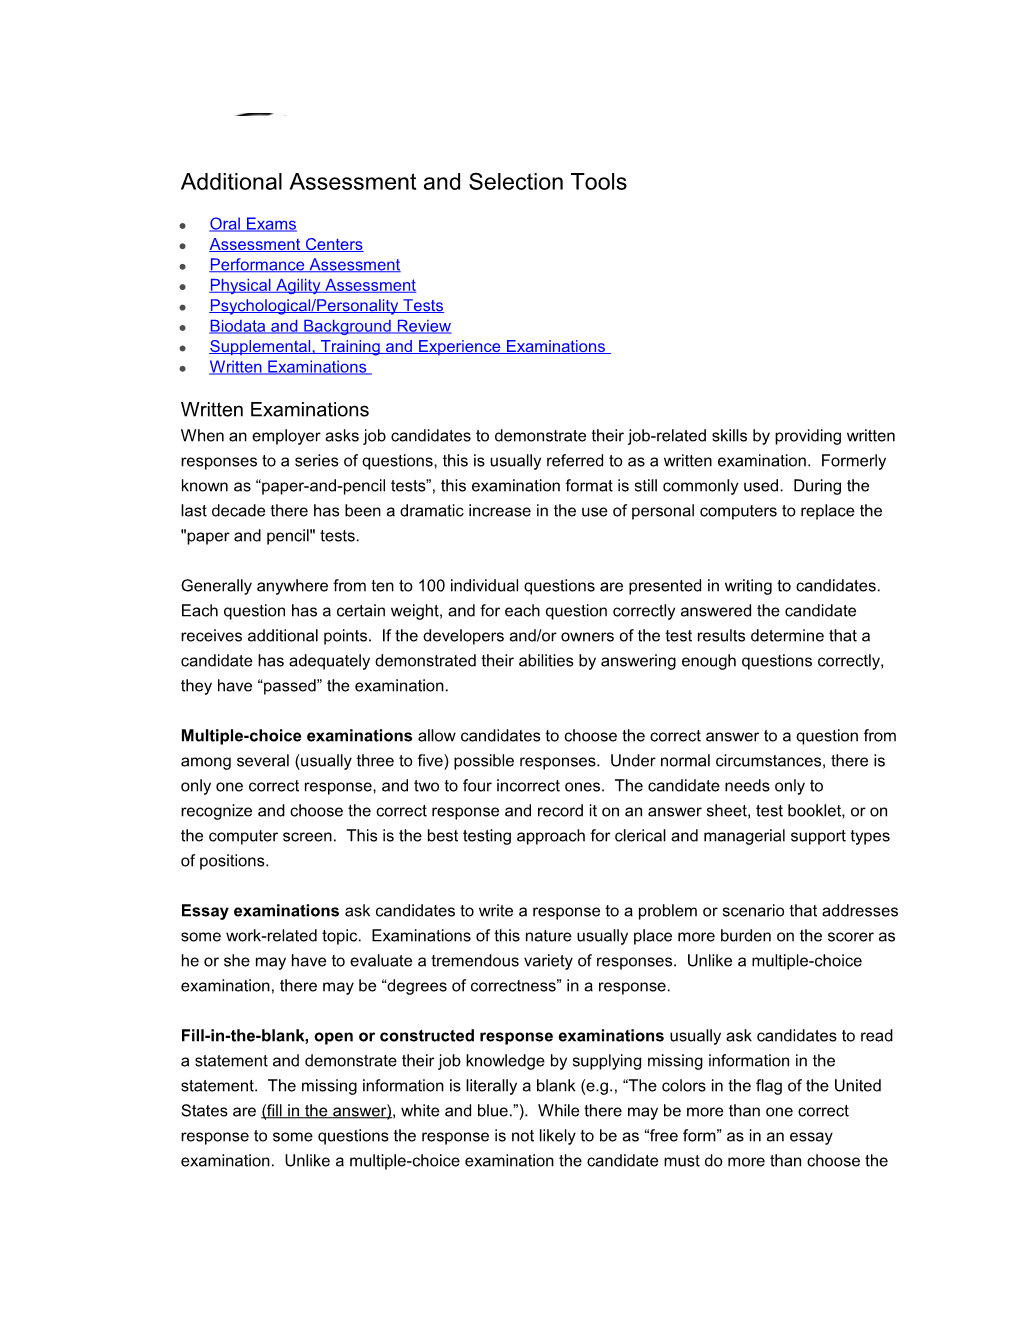 Additional Assessment and Selection Tools